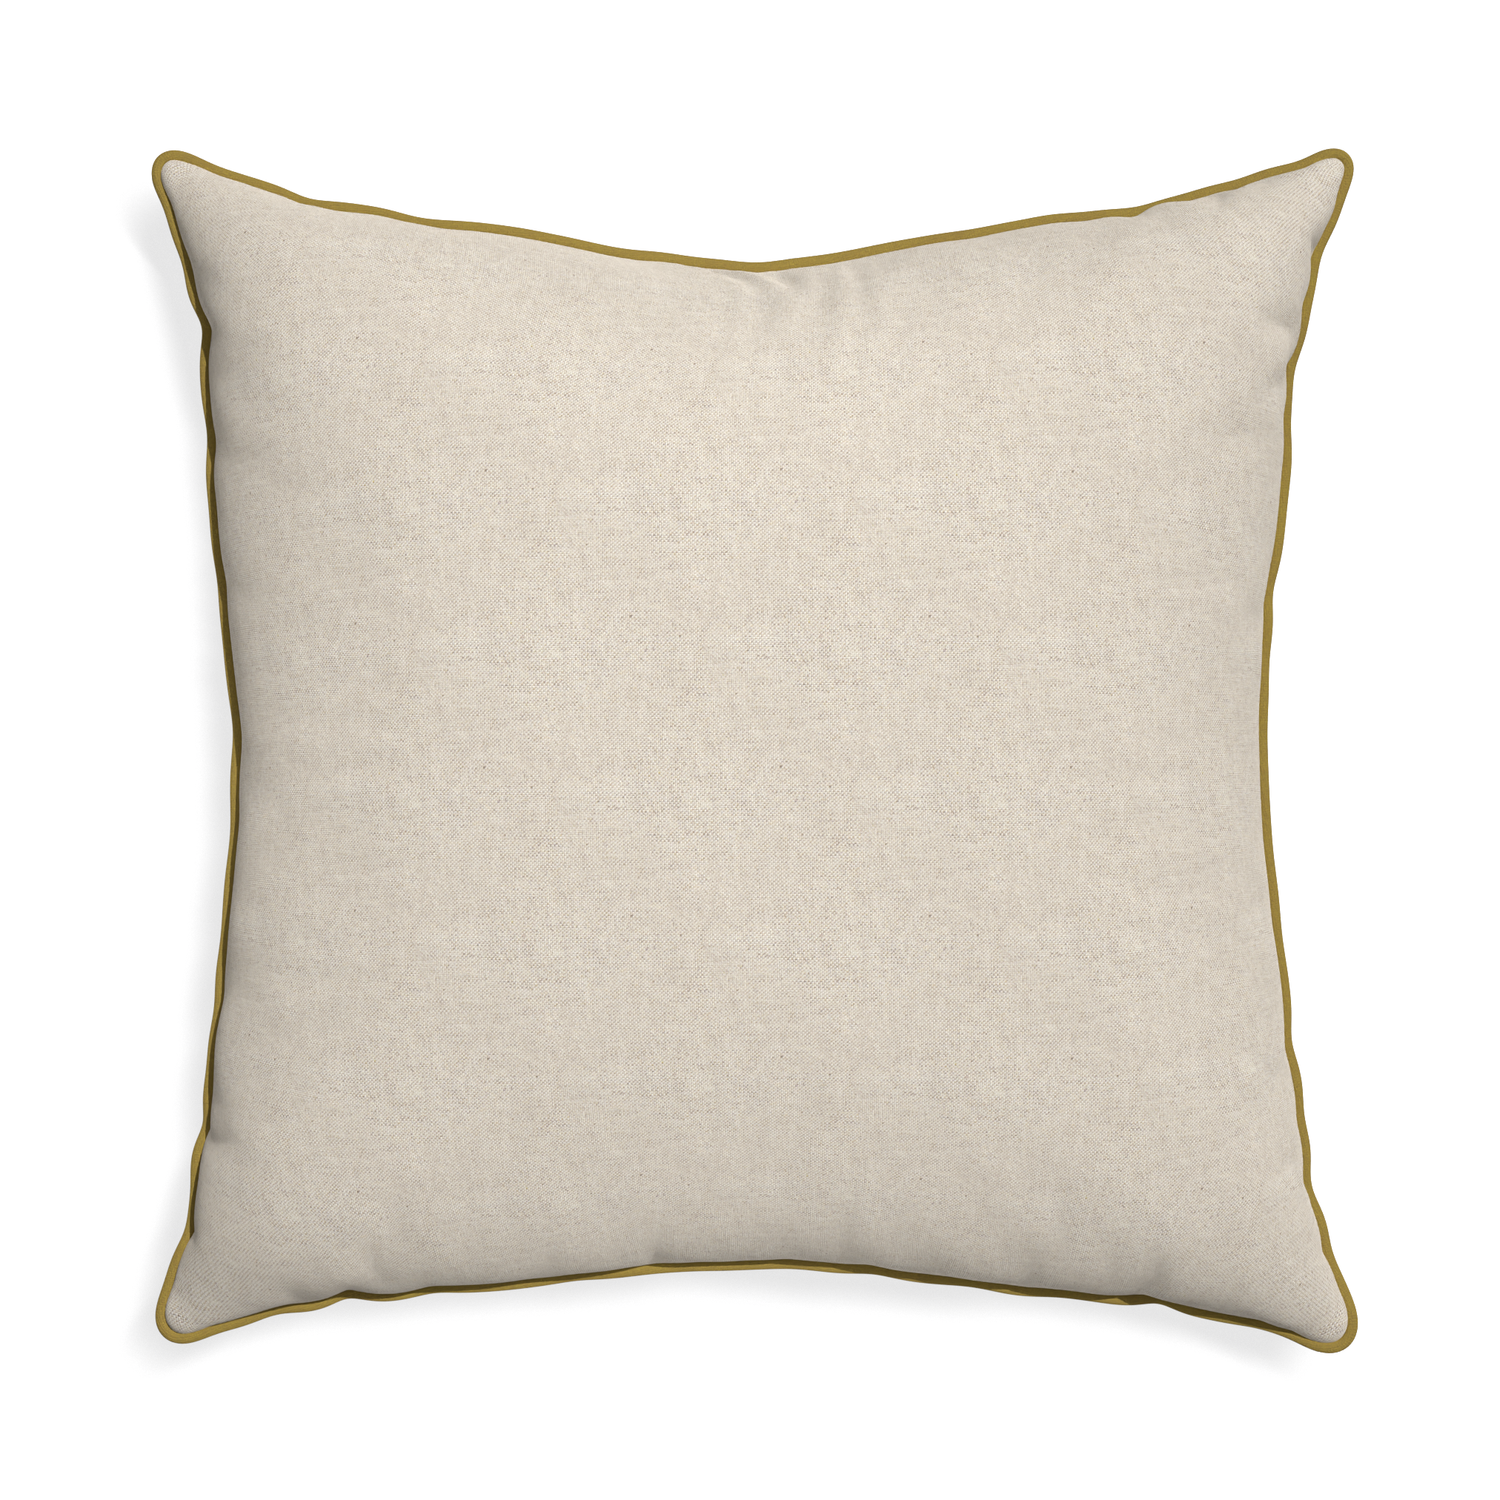 Euro-sham oat custom light brownpillow with c piping on white background